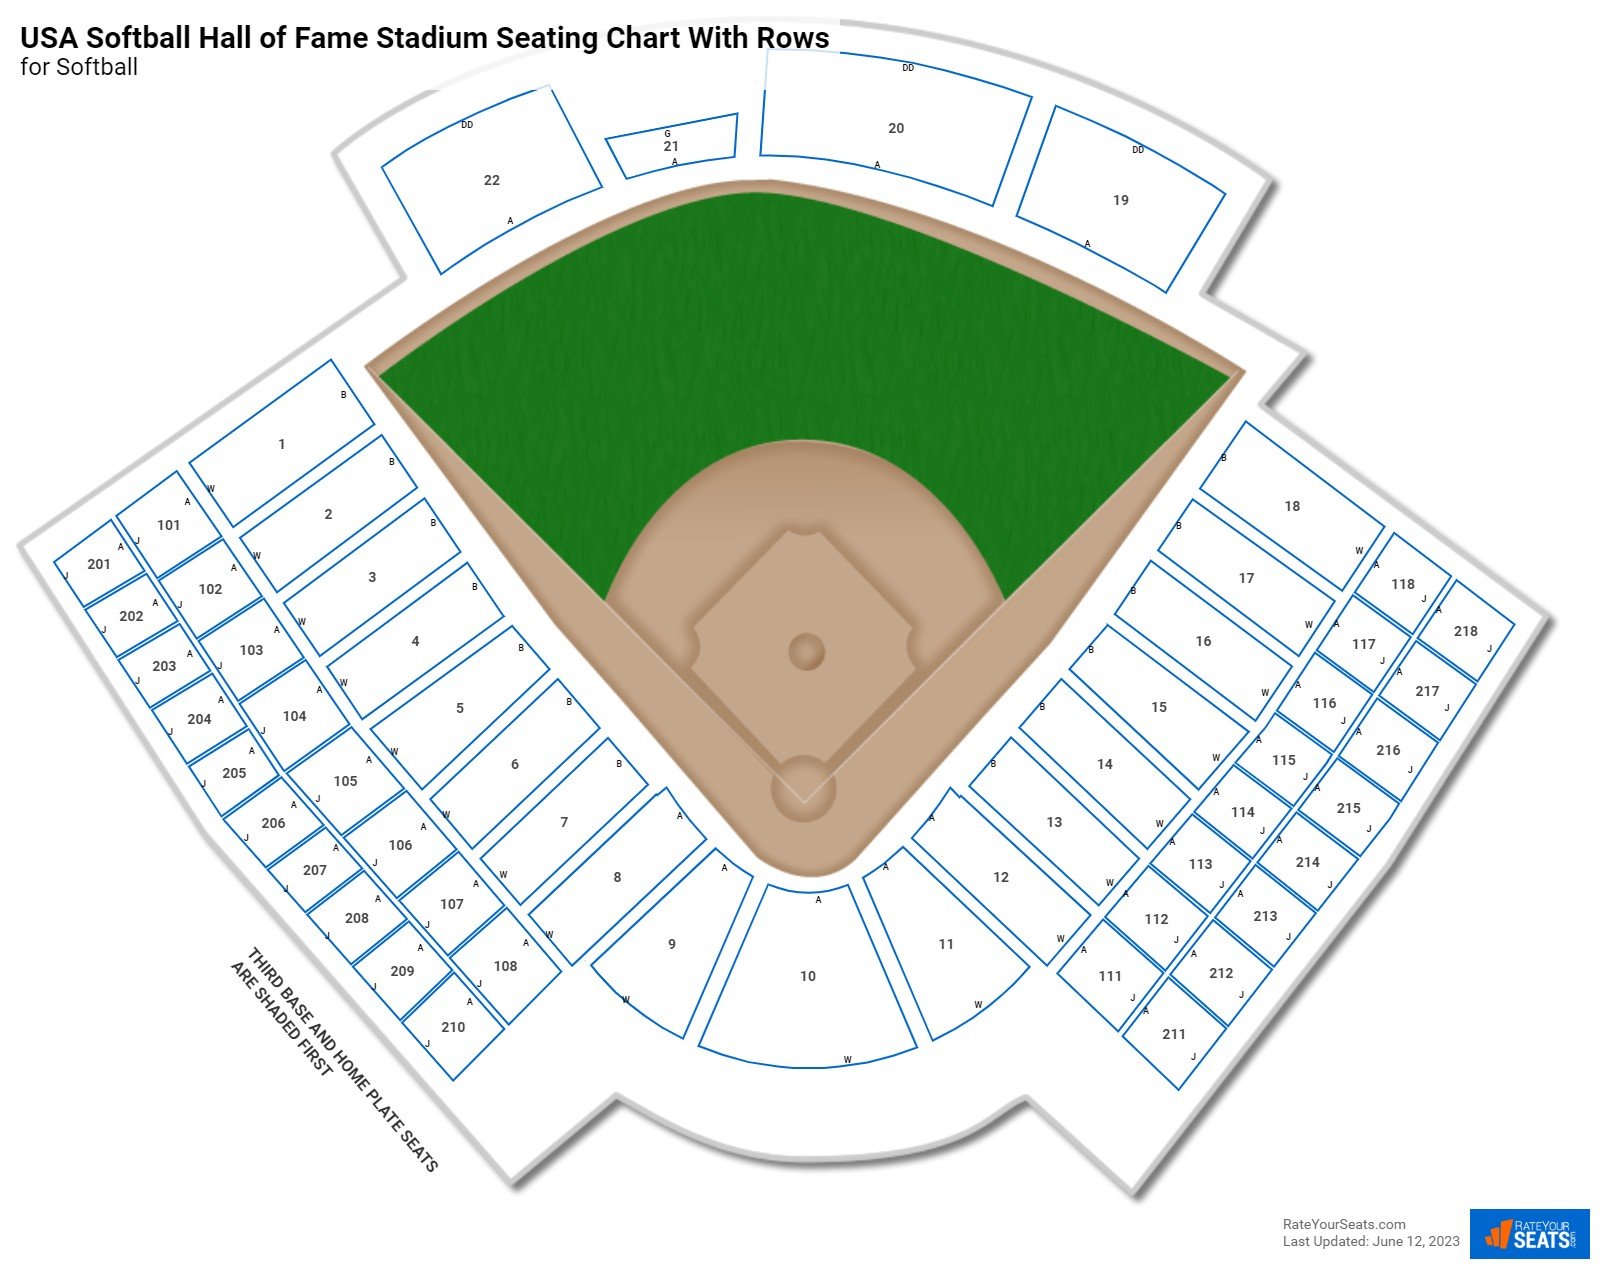 ASA Hall of Fame Stadium seating chart with row numbers